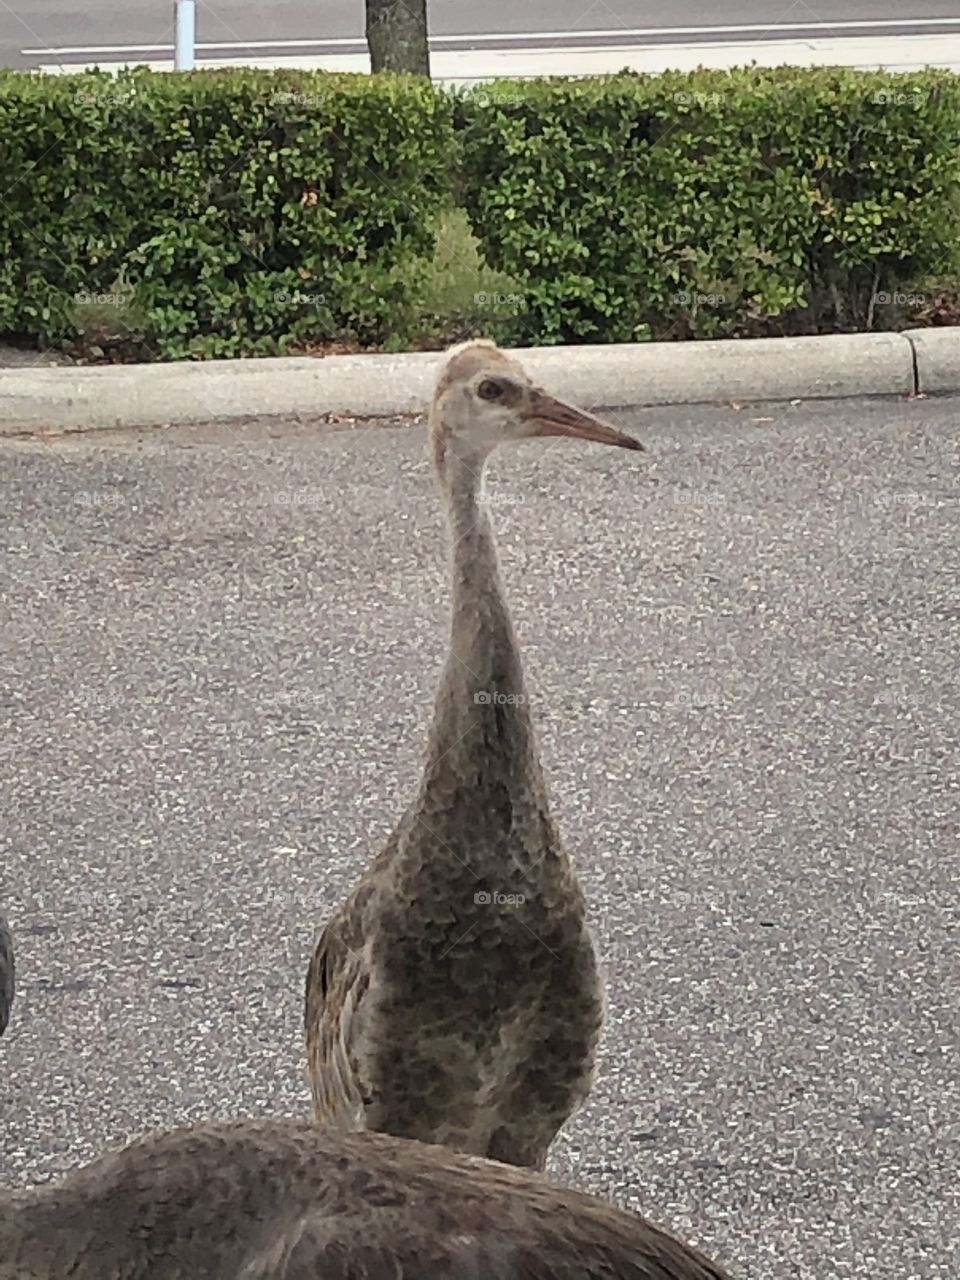 Beautiful baby Sandhill Crane hanging out with parents at a fast food parking lot , we keep building on these guys homes and now they are endangered with not too many more places to really go around us. Tampa , Florida 